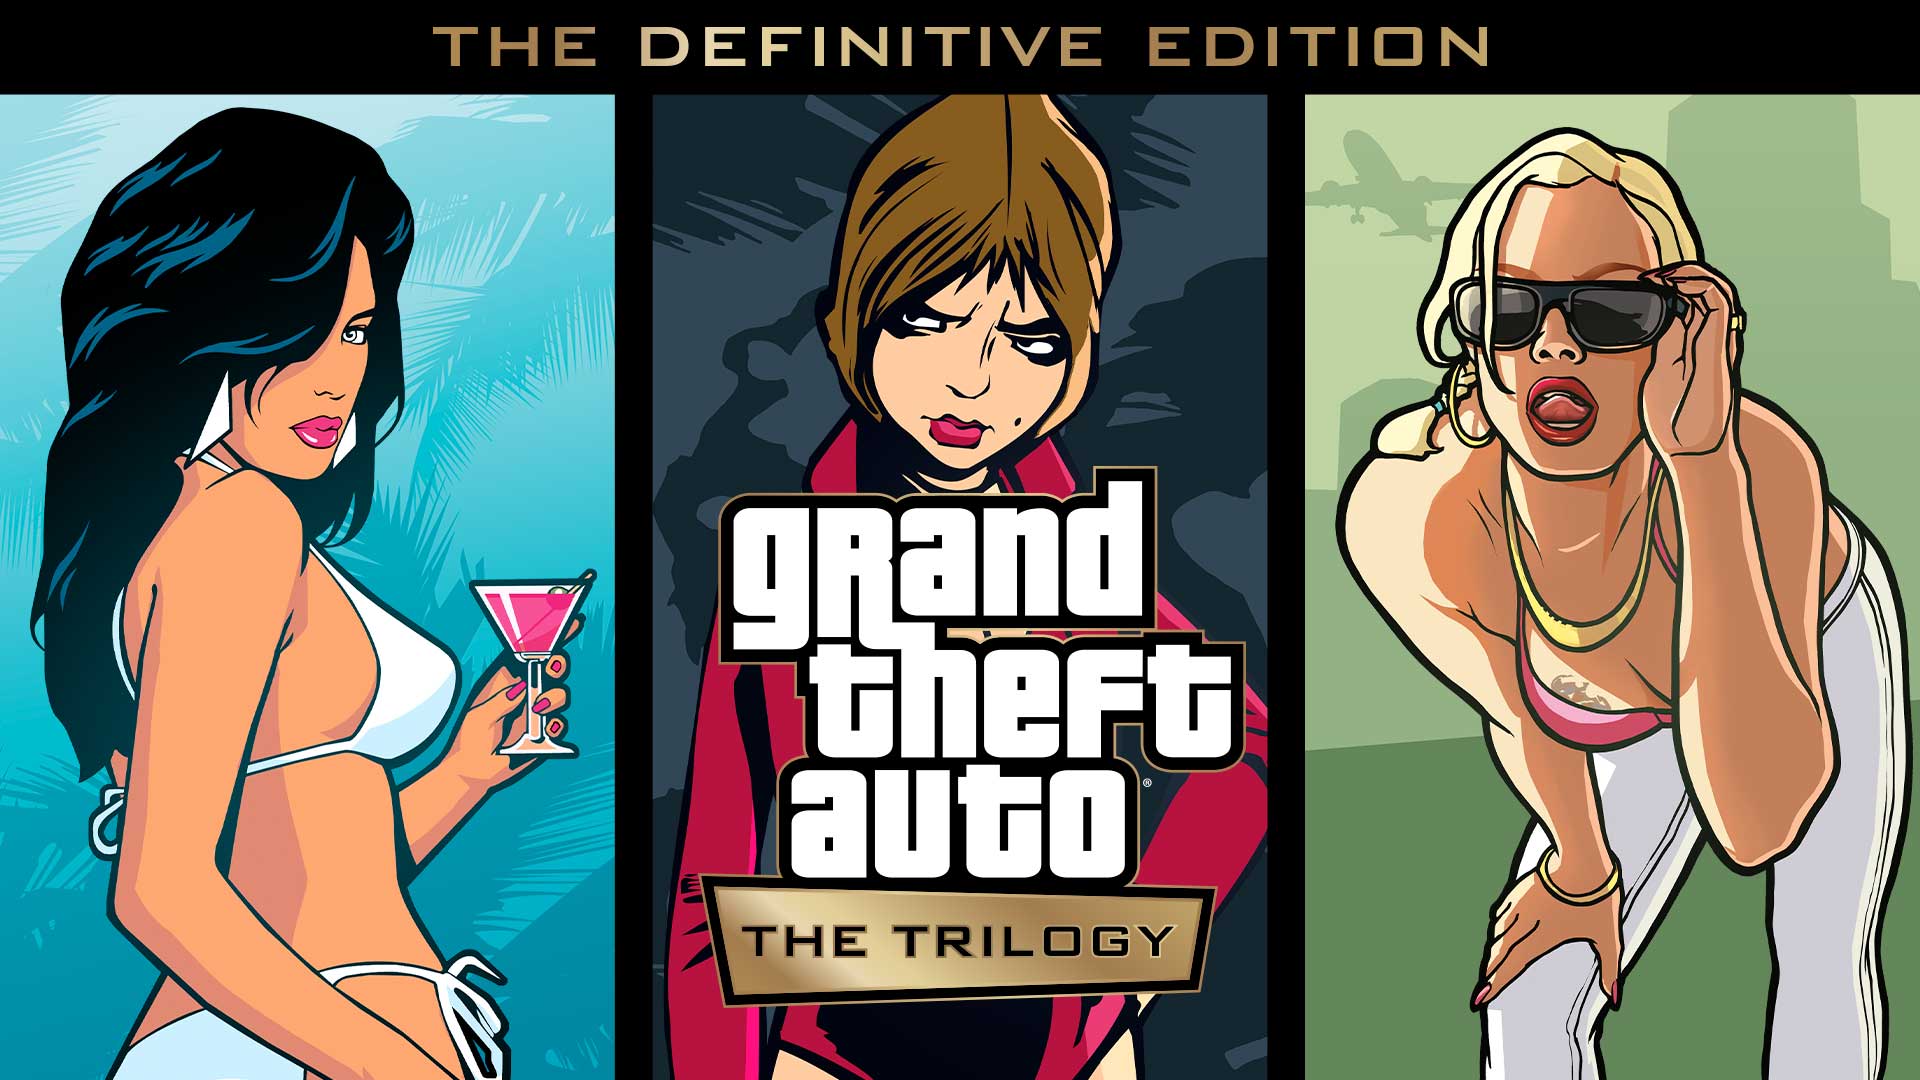 Grand Theft Auto: The Trilogy - The Definitive Edition confirmed for November 11